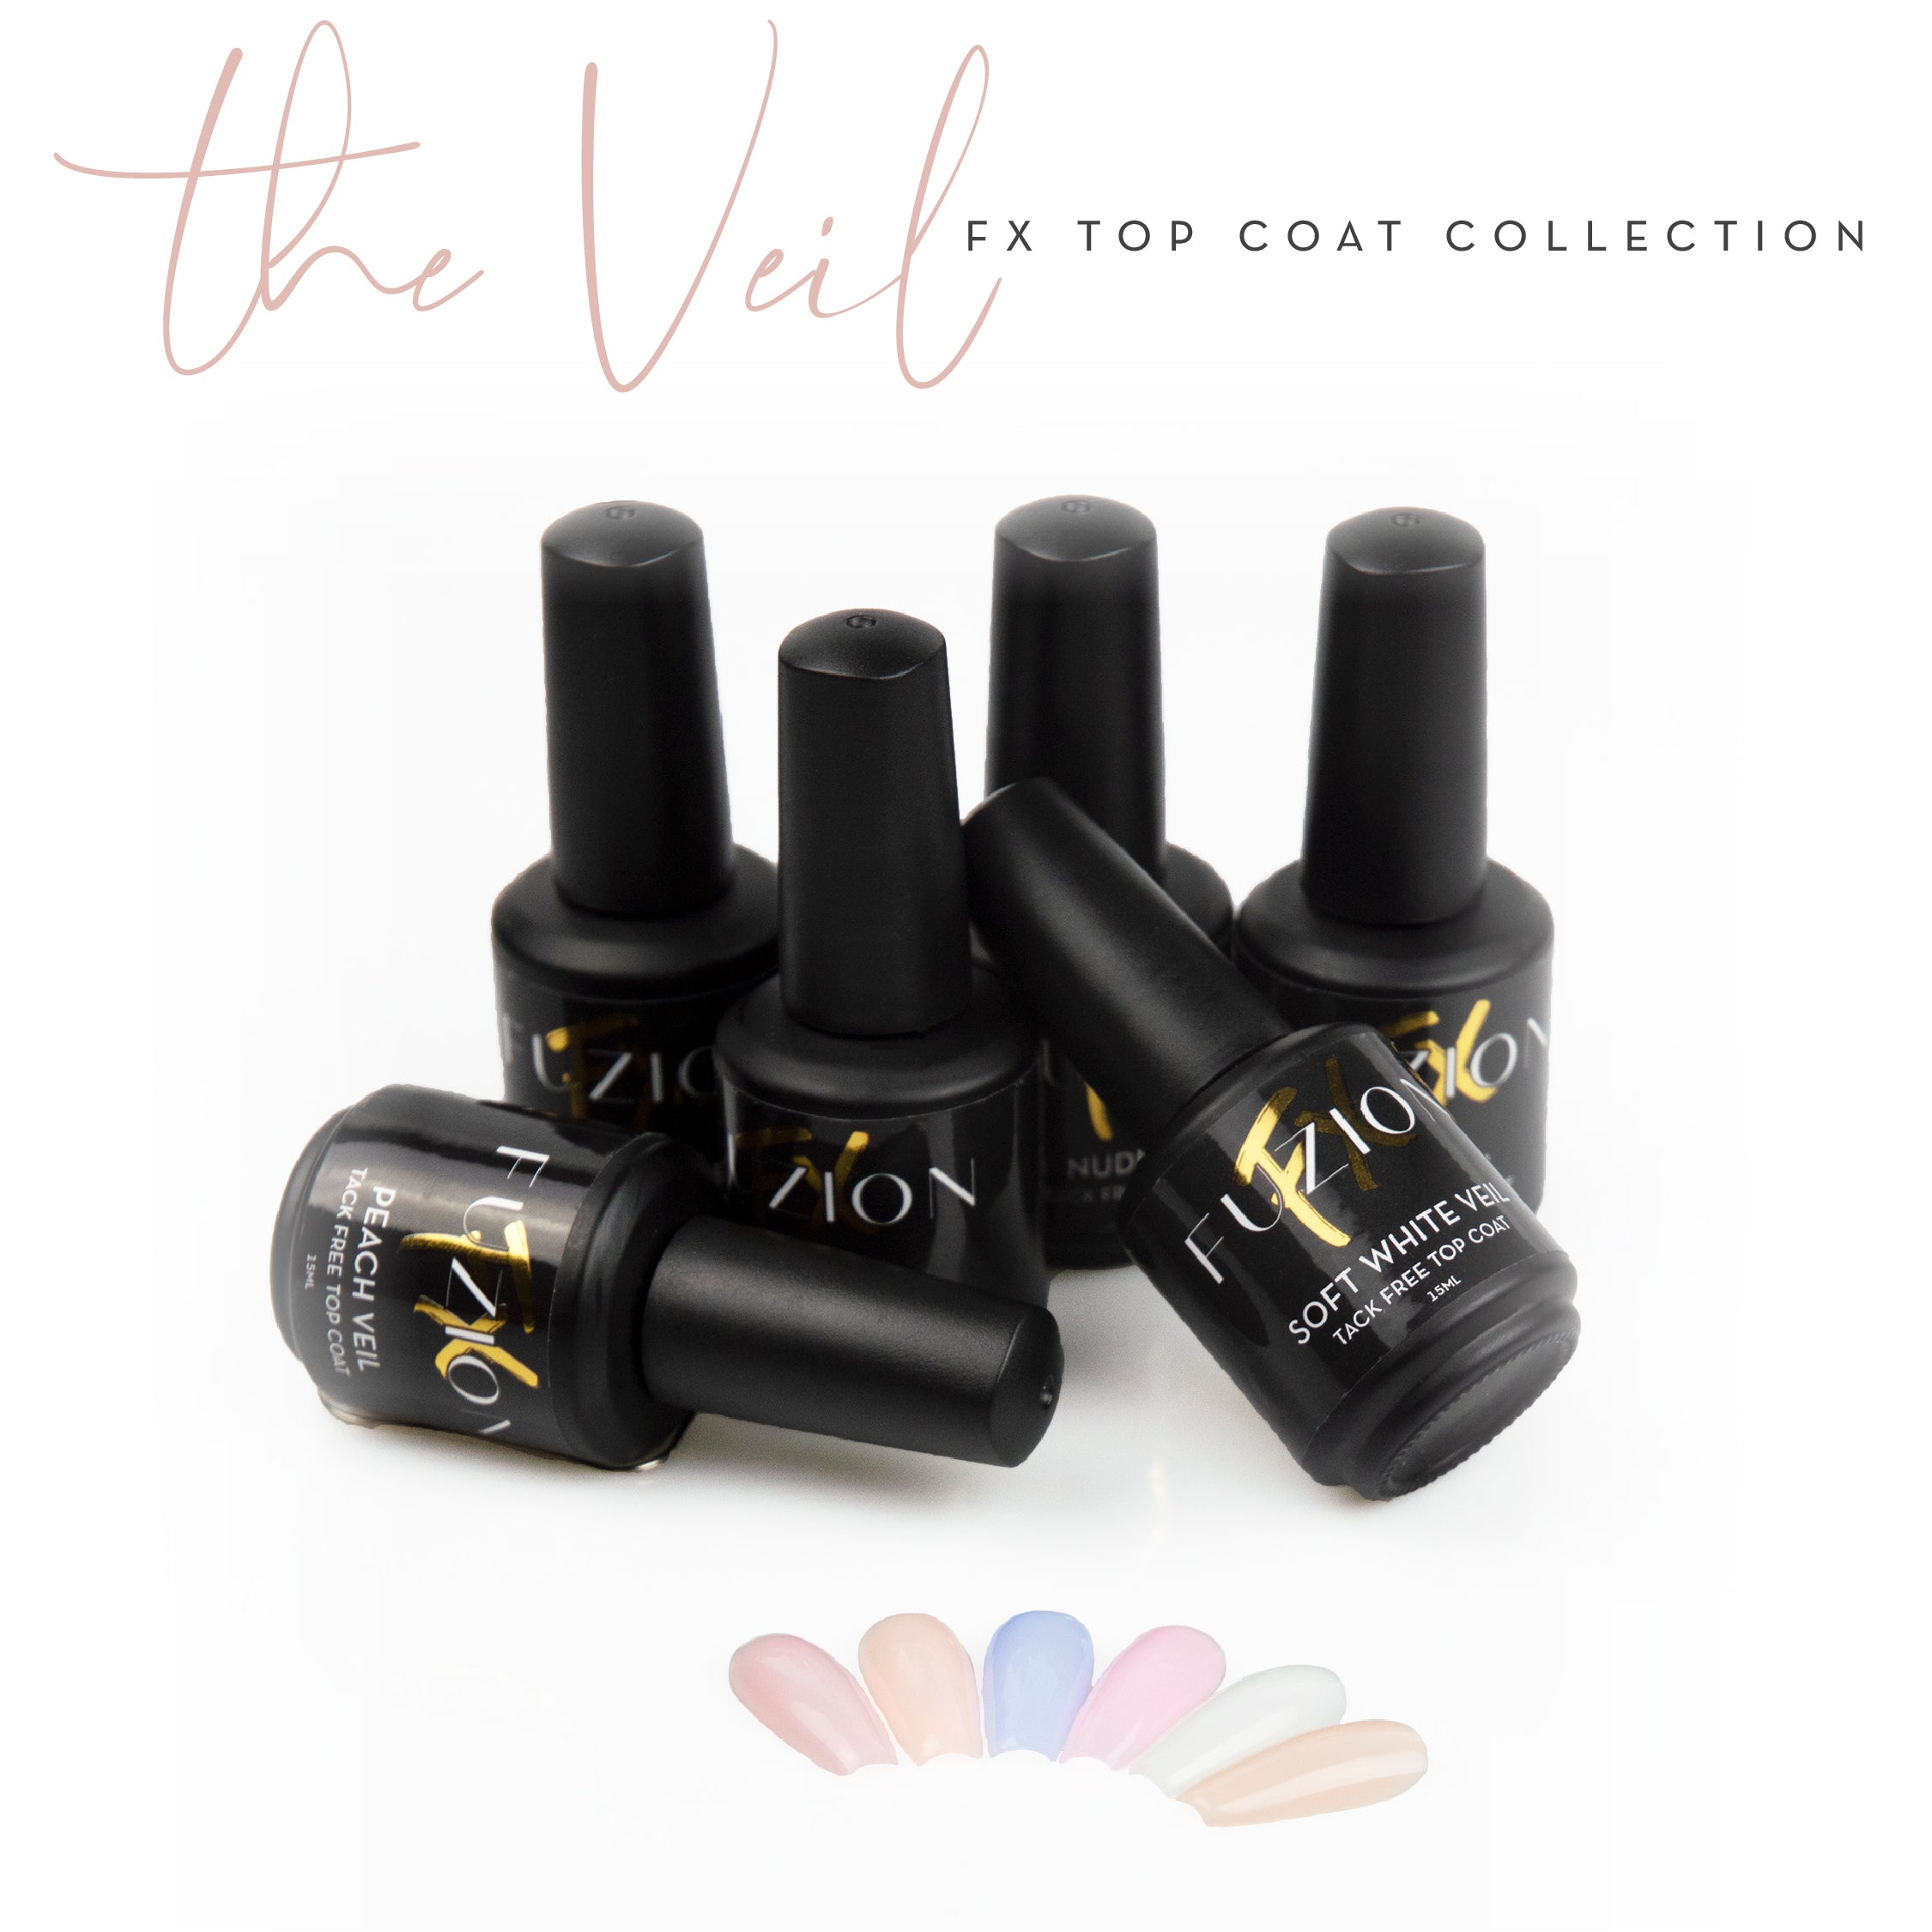 Fuzion FX - The Veil Top Coat Collection - Creata Beauty - Professional Beauty Products